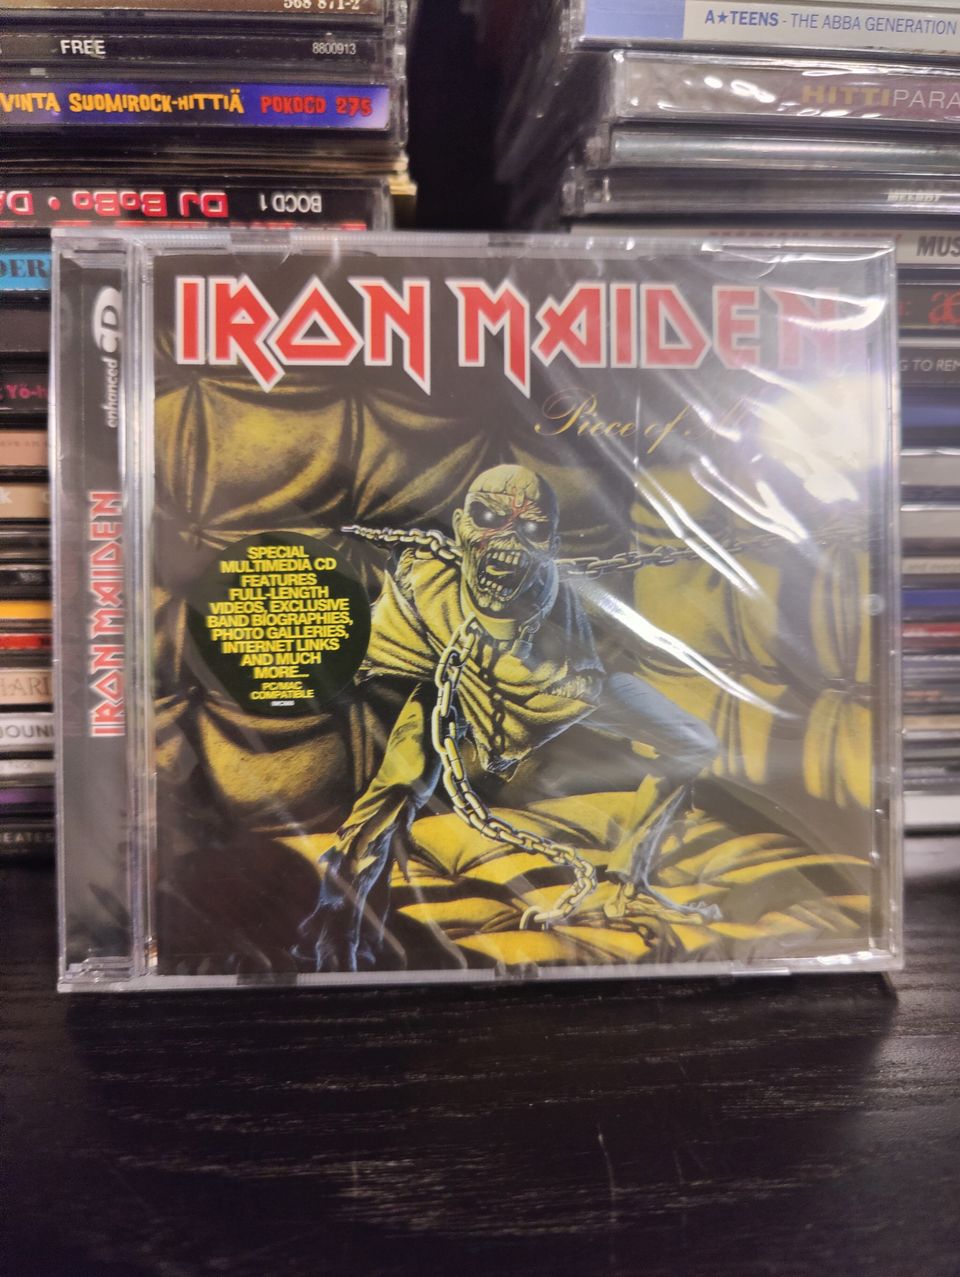 Iron maiden peace of mind remastered sealed, mint!